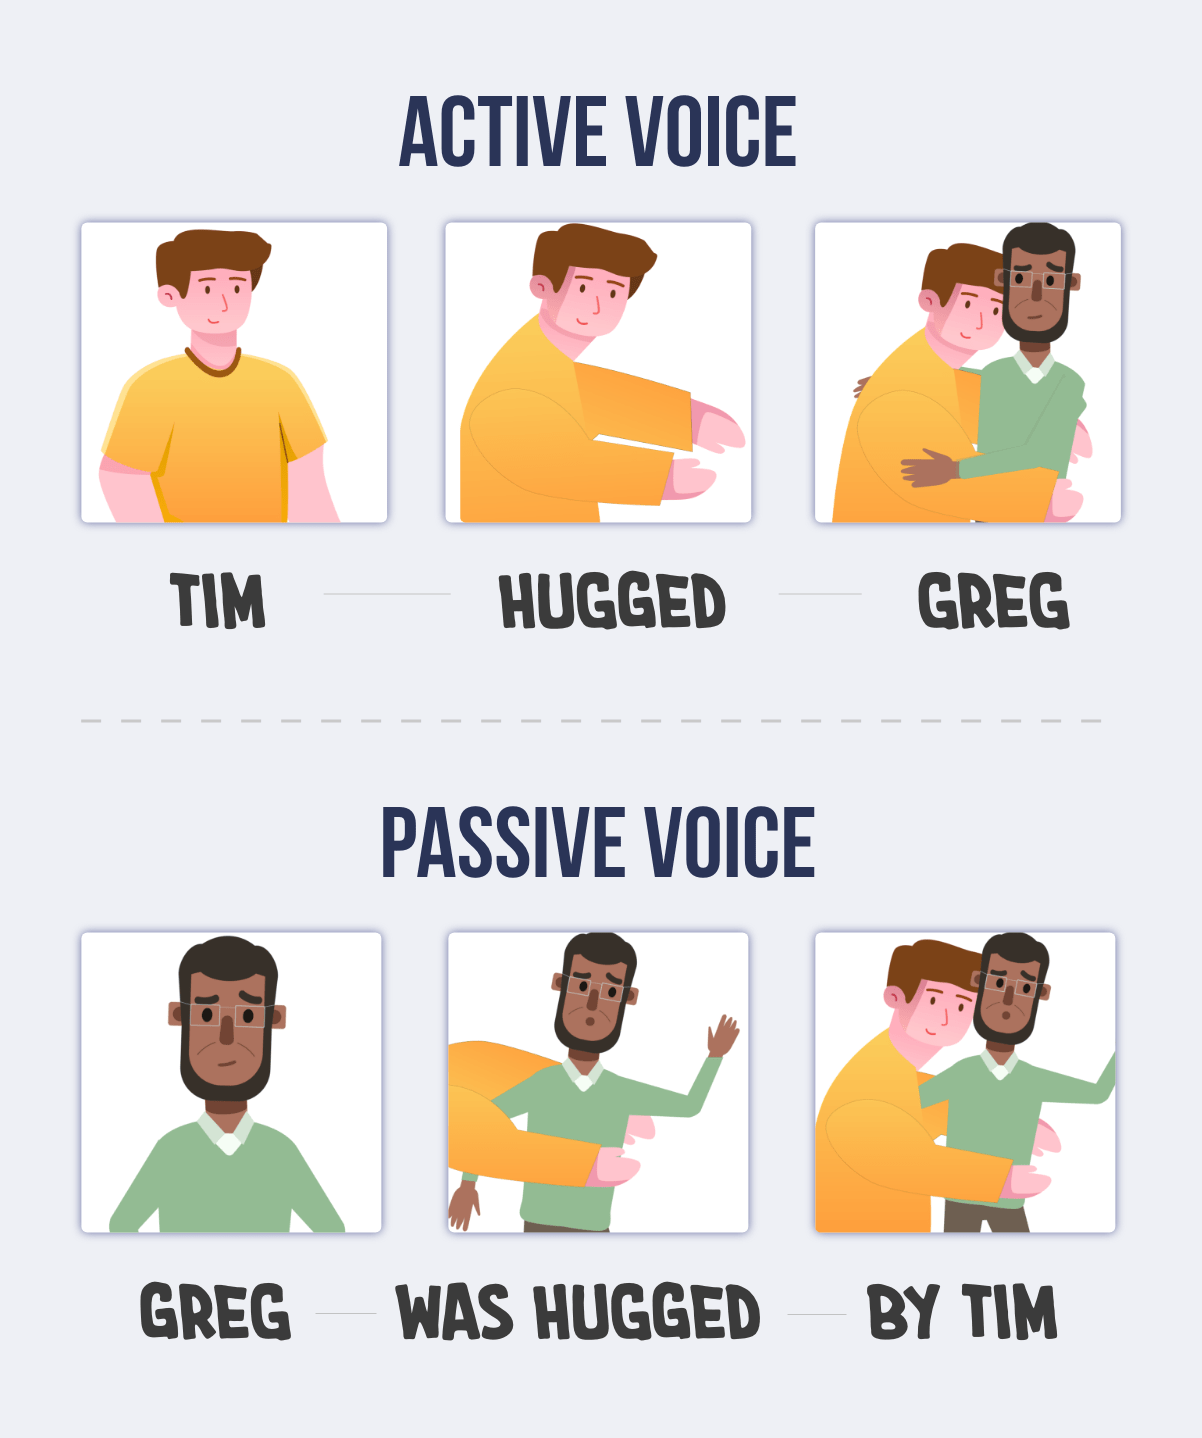 Active voice is "Tim hugged Greg" which shows a a seamless image for each section of that sentence. Passive voice is "Greg was hugged by Tim" which shows an image in which Greg is being hugged by something unknown, and it's confusing